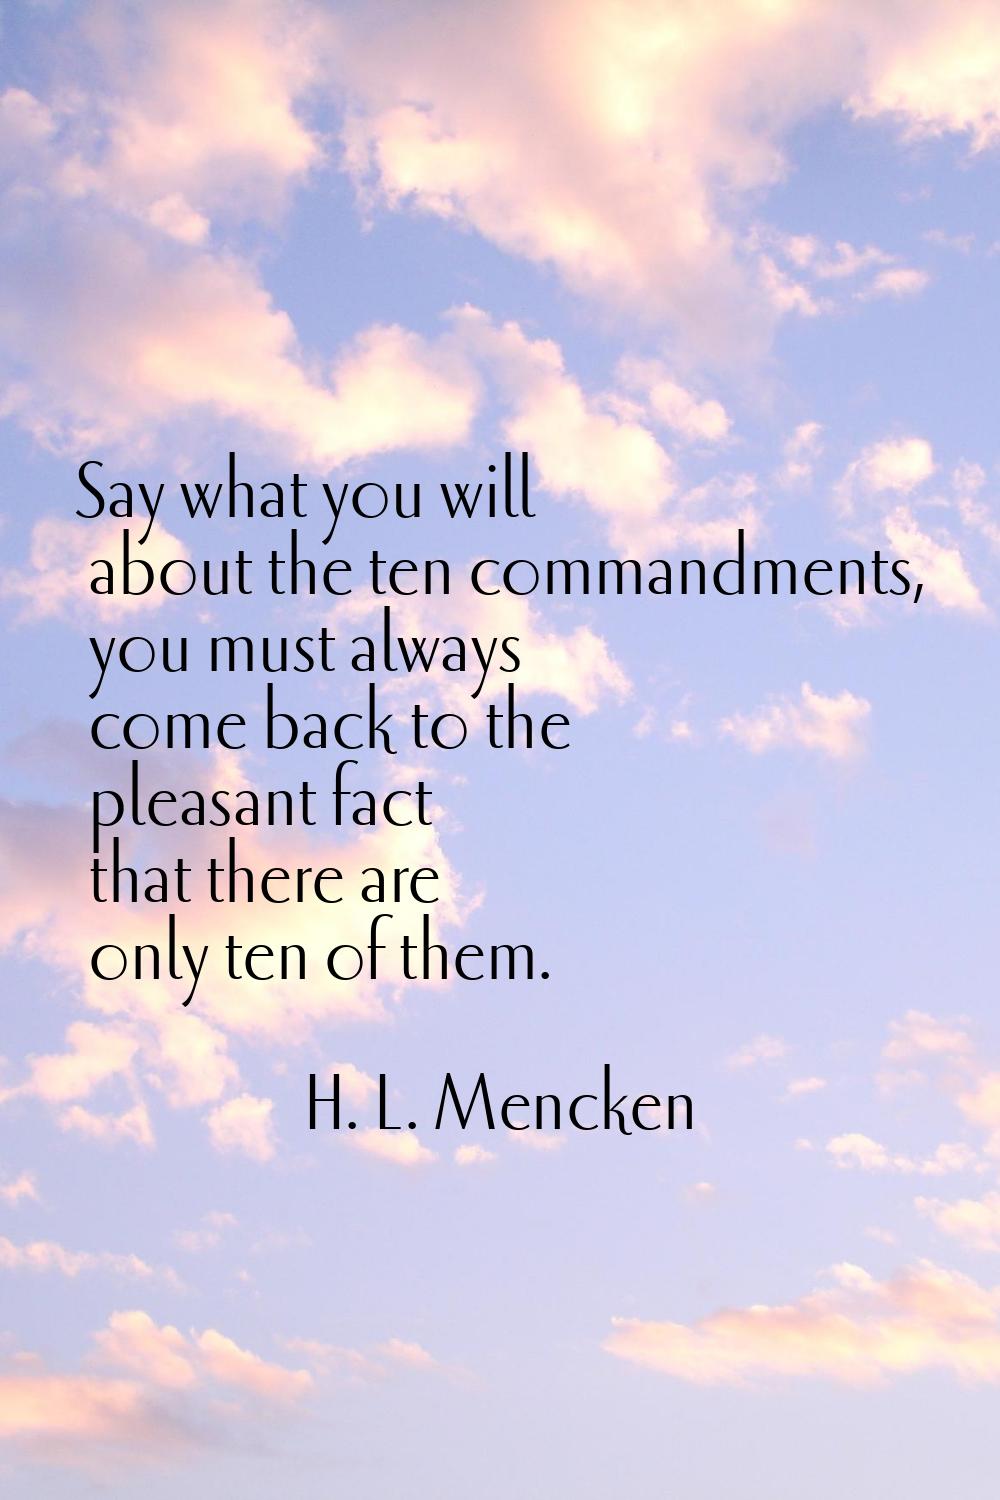 Say what you will about the ten commandments, you must always come back to the pleasant fact that t